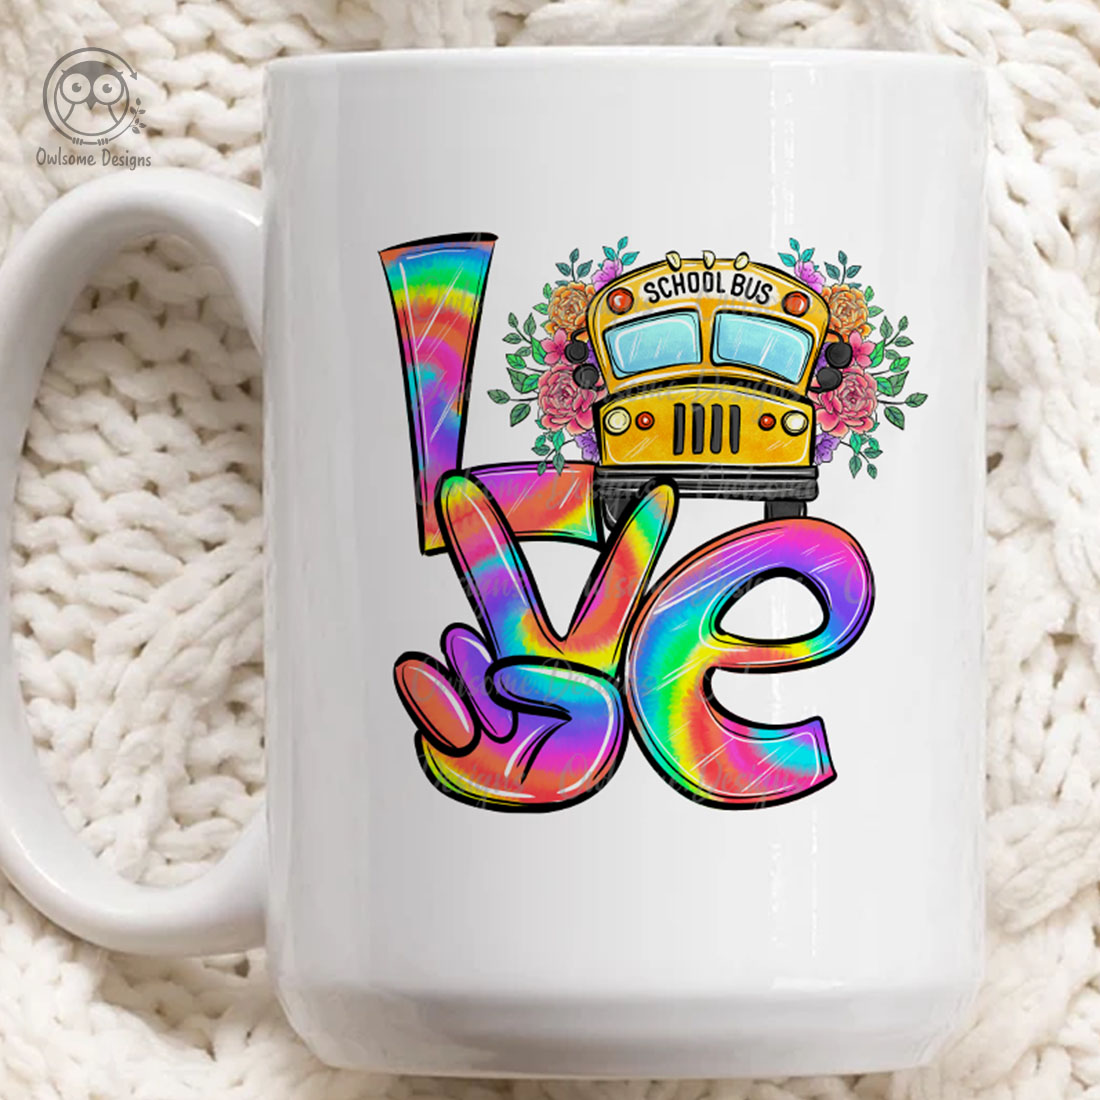 Image of a cup with a beautiful inscription love with a bus.